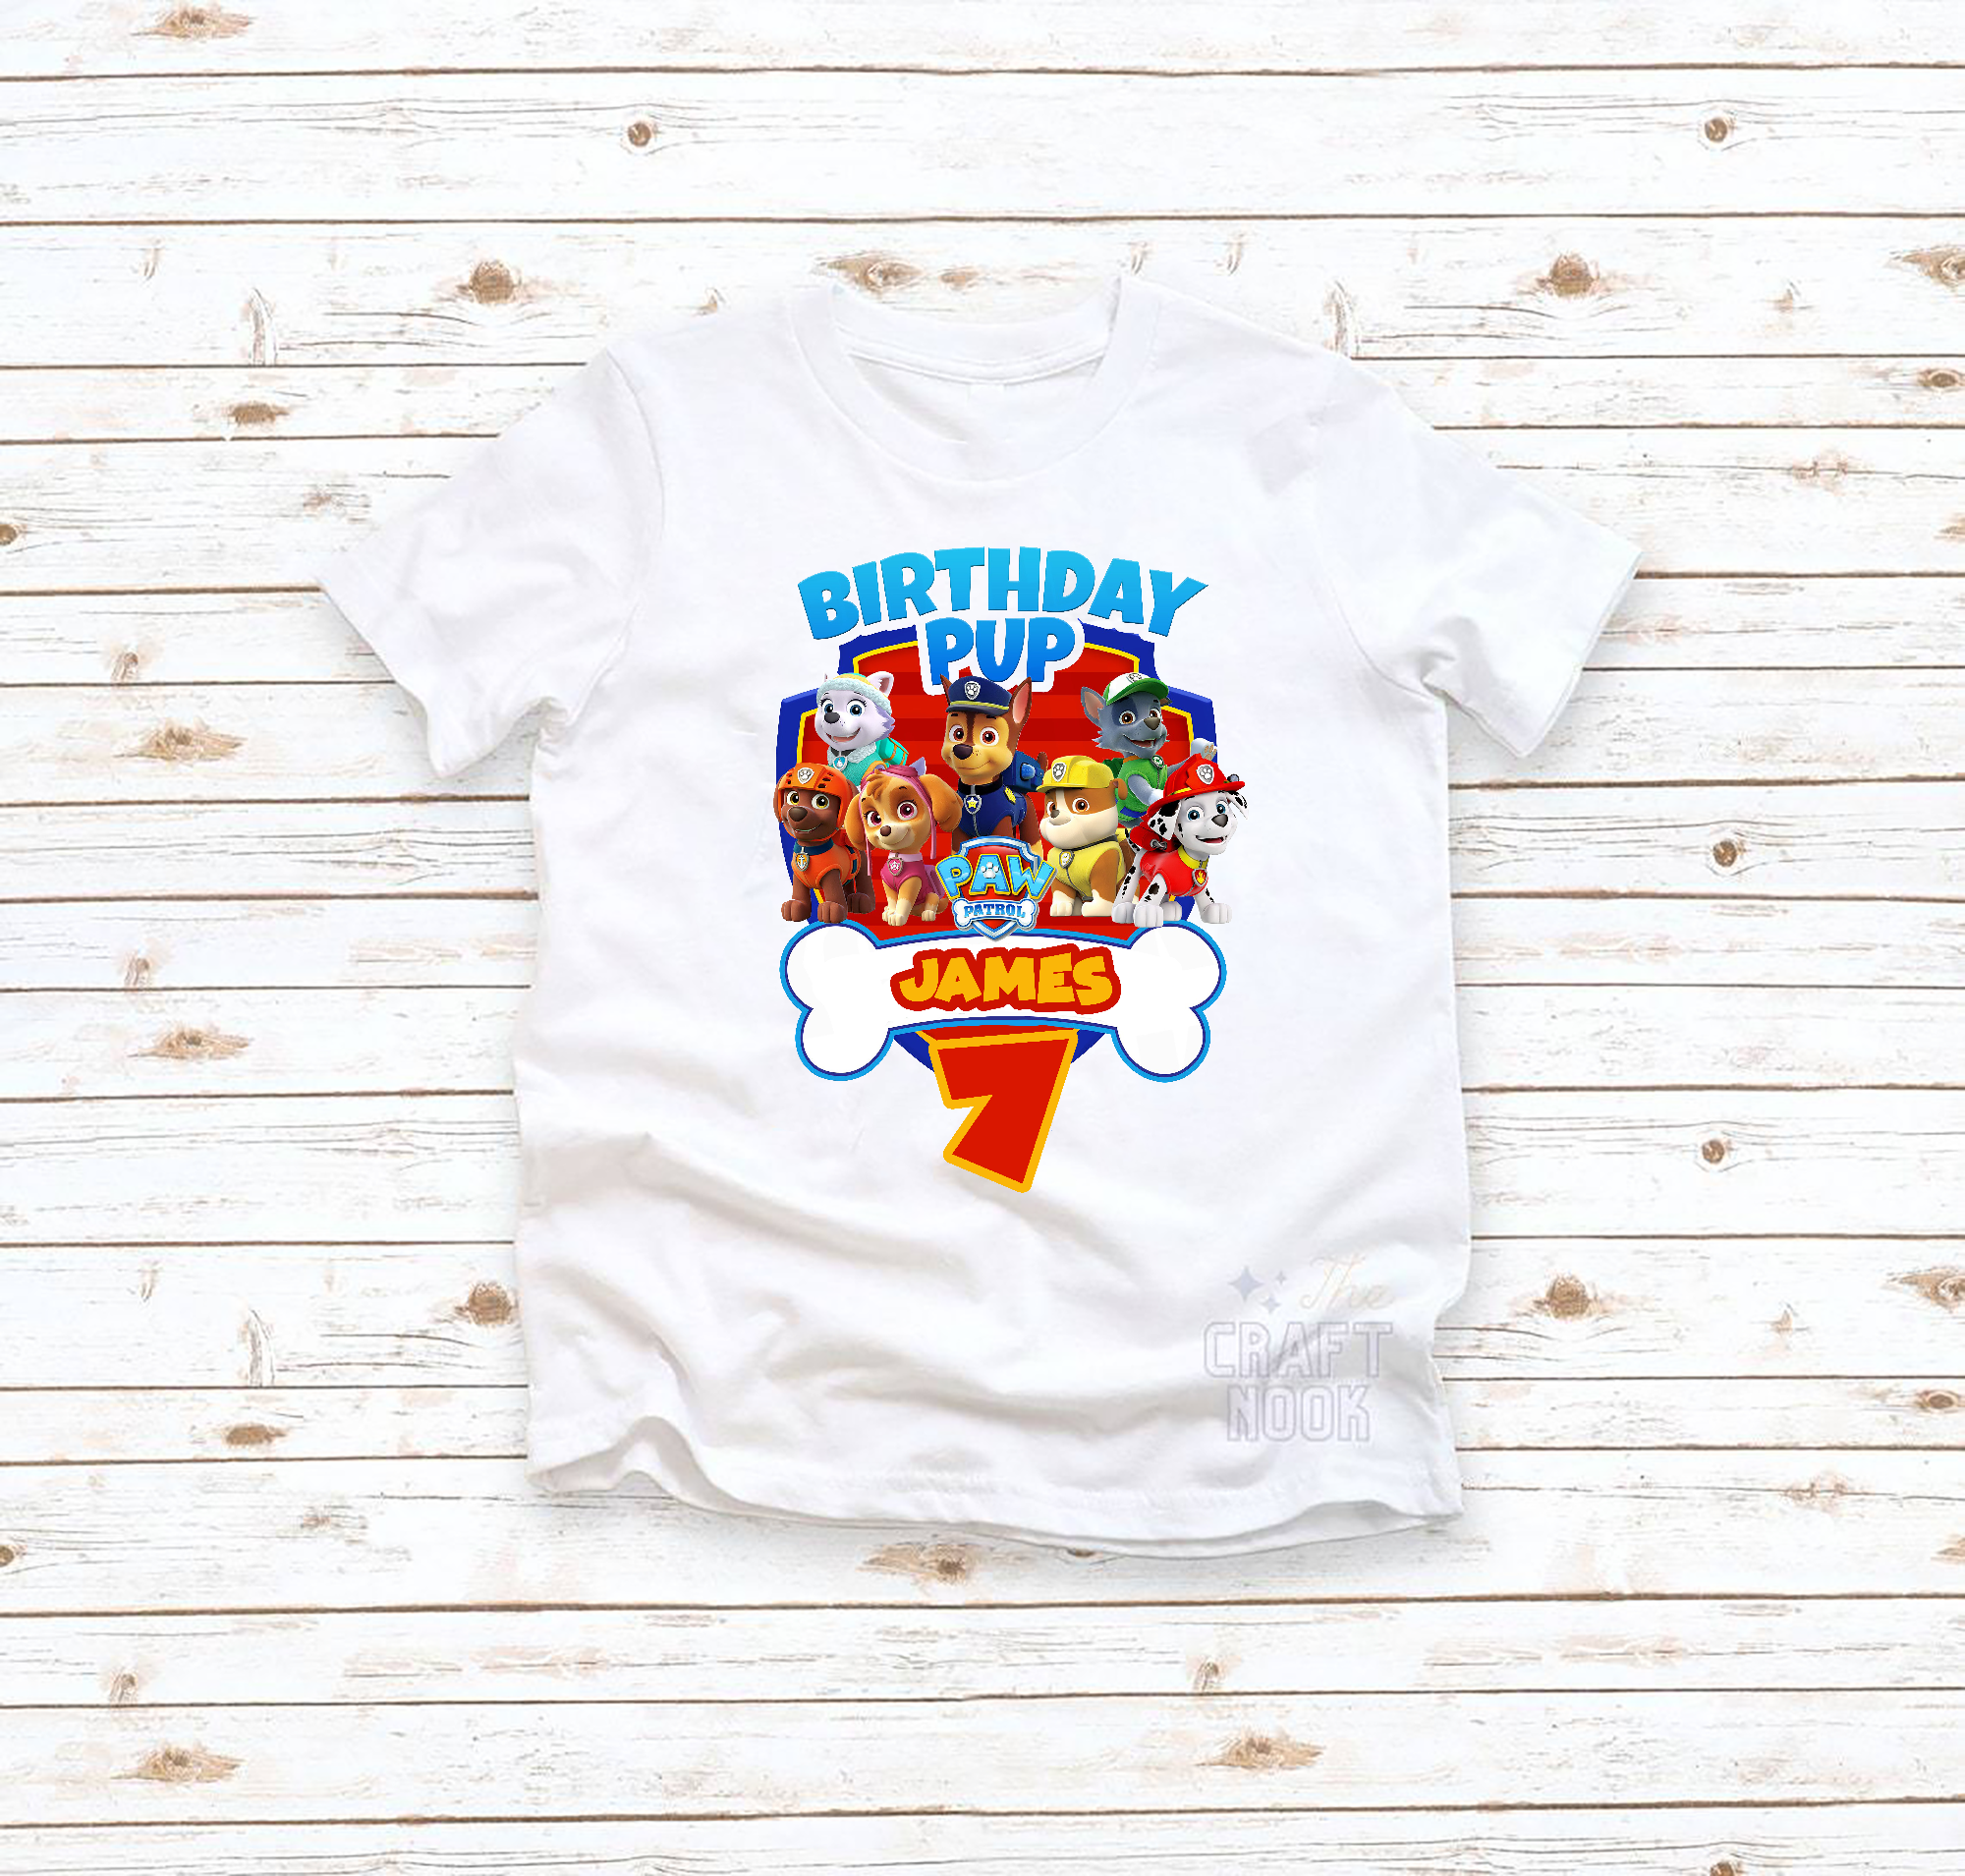 Paw Patrol Inspired Birthday T Shirt, Paw Patrol Theme Party, Personalized shirt for kids, Matching Family Shirts